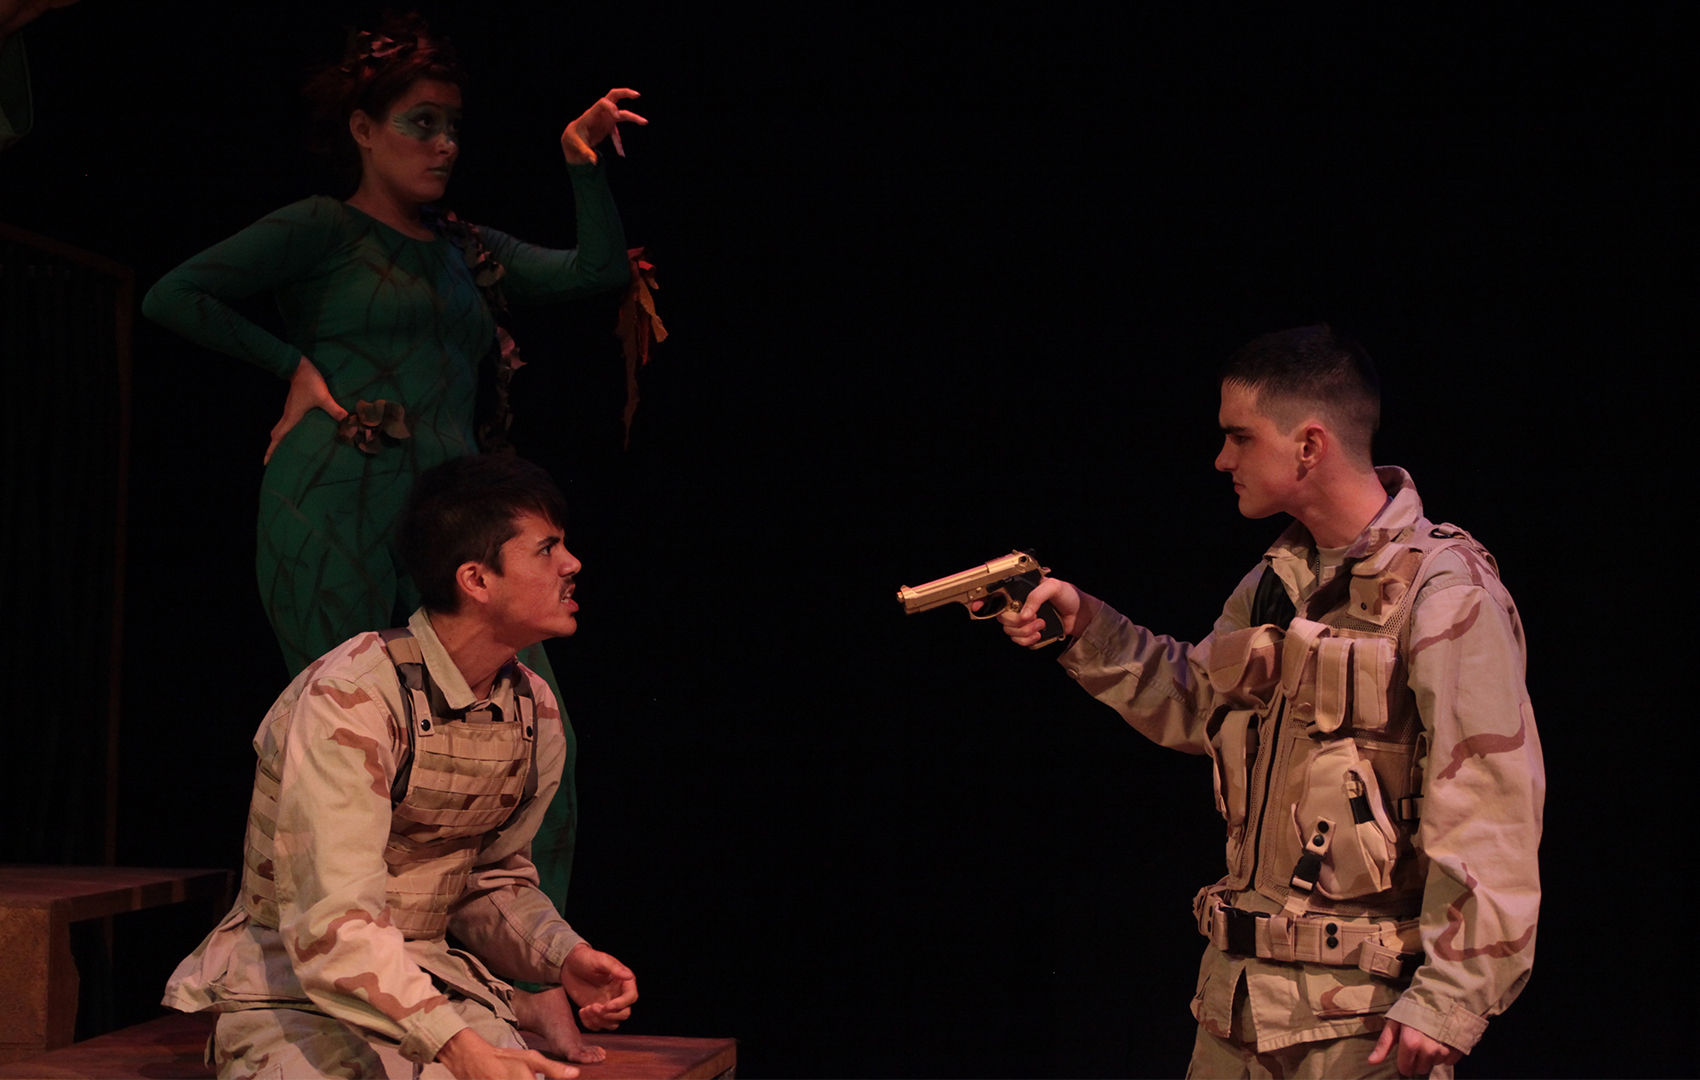 This scene showcases the middle of an intense argument/confrontation. A young woman dressed in green clothing stands in the background, shadowed by darkness, her hand posed in a clawing manner. She stands in the teapot position. In the foreground, two young men are faced to each other, one sitting down yelling at the other one, who stands with a gun pointed at the former. Both are wearing military gear.     